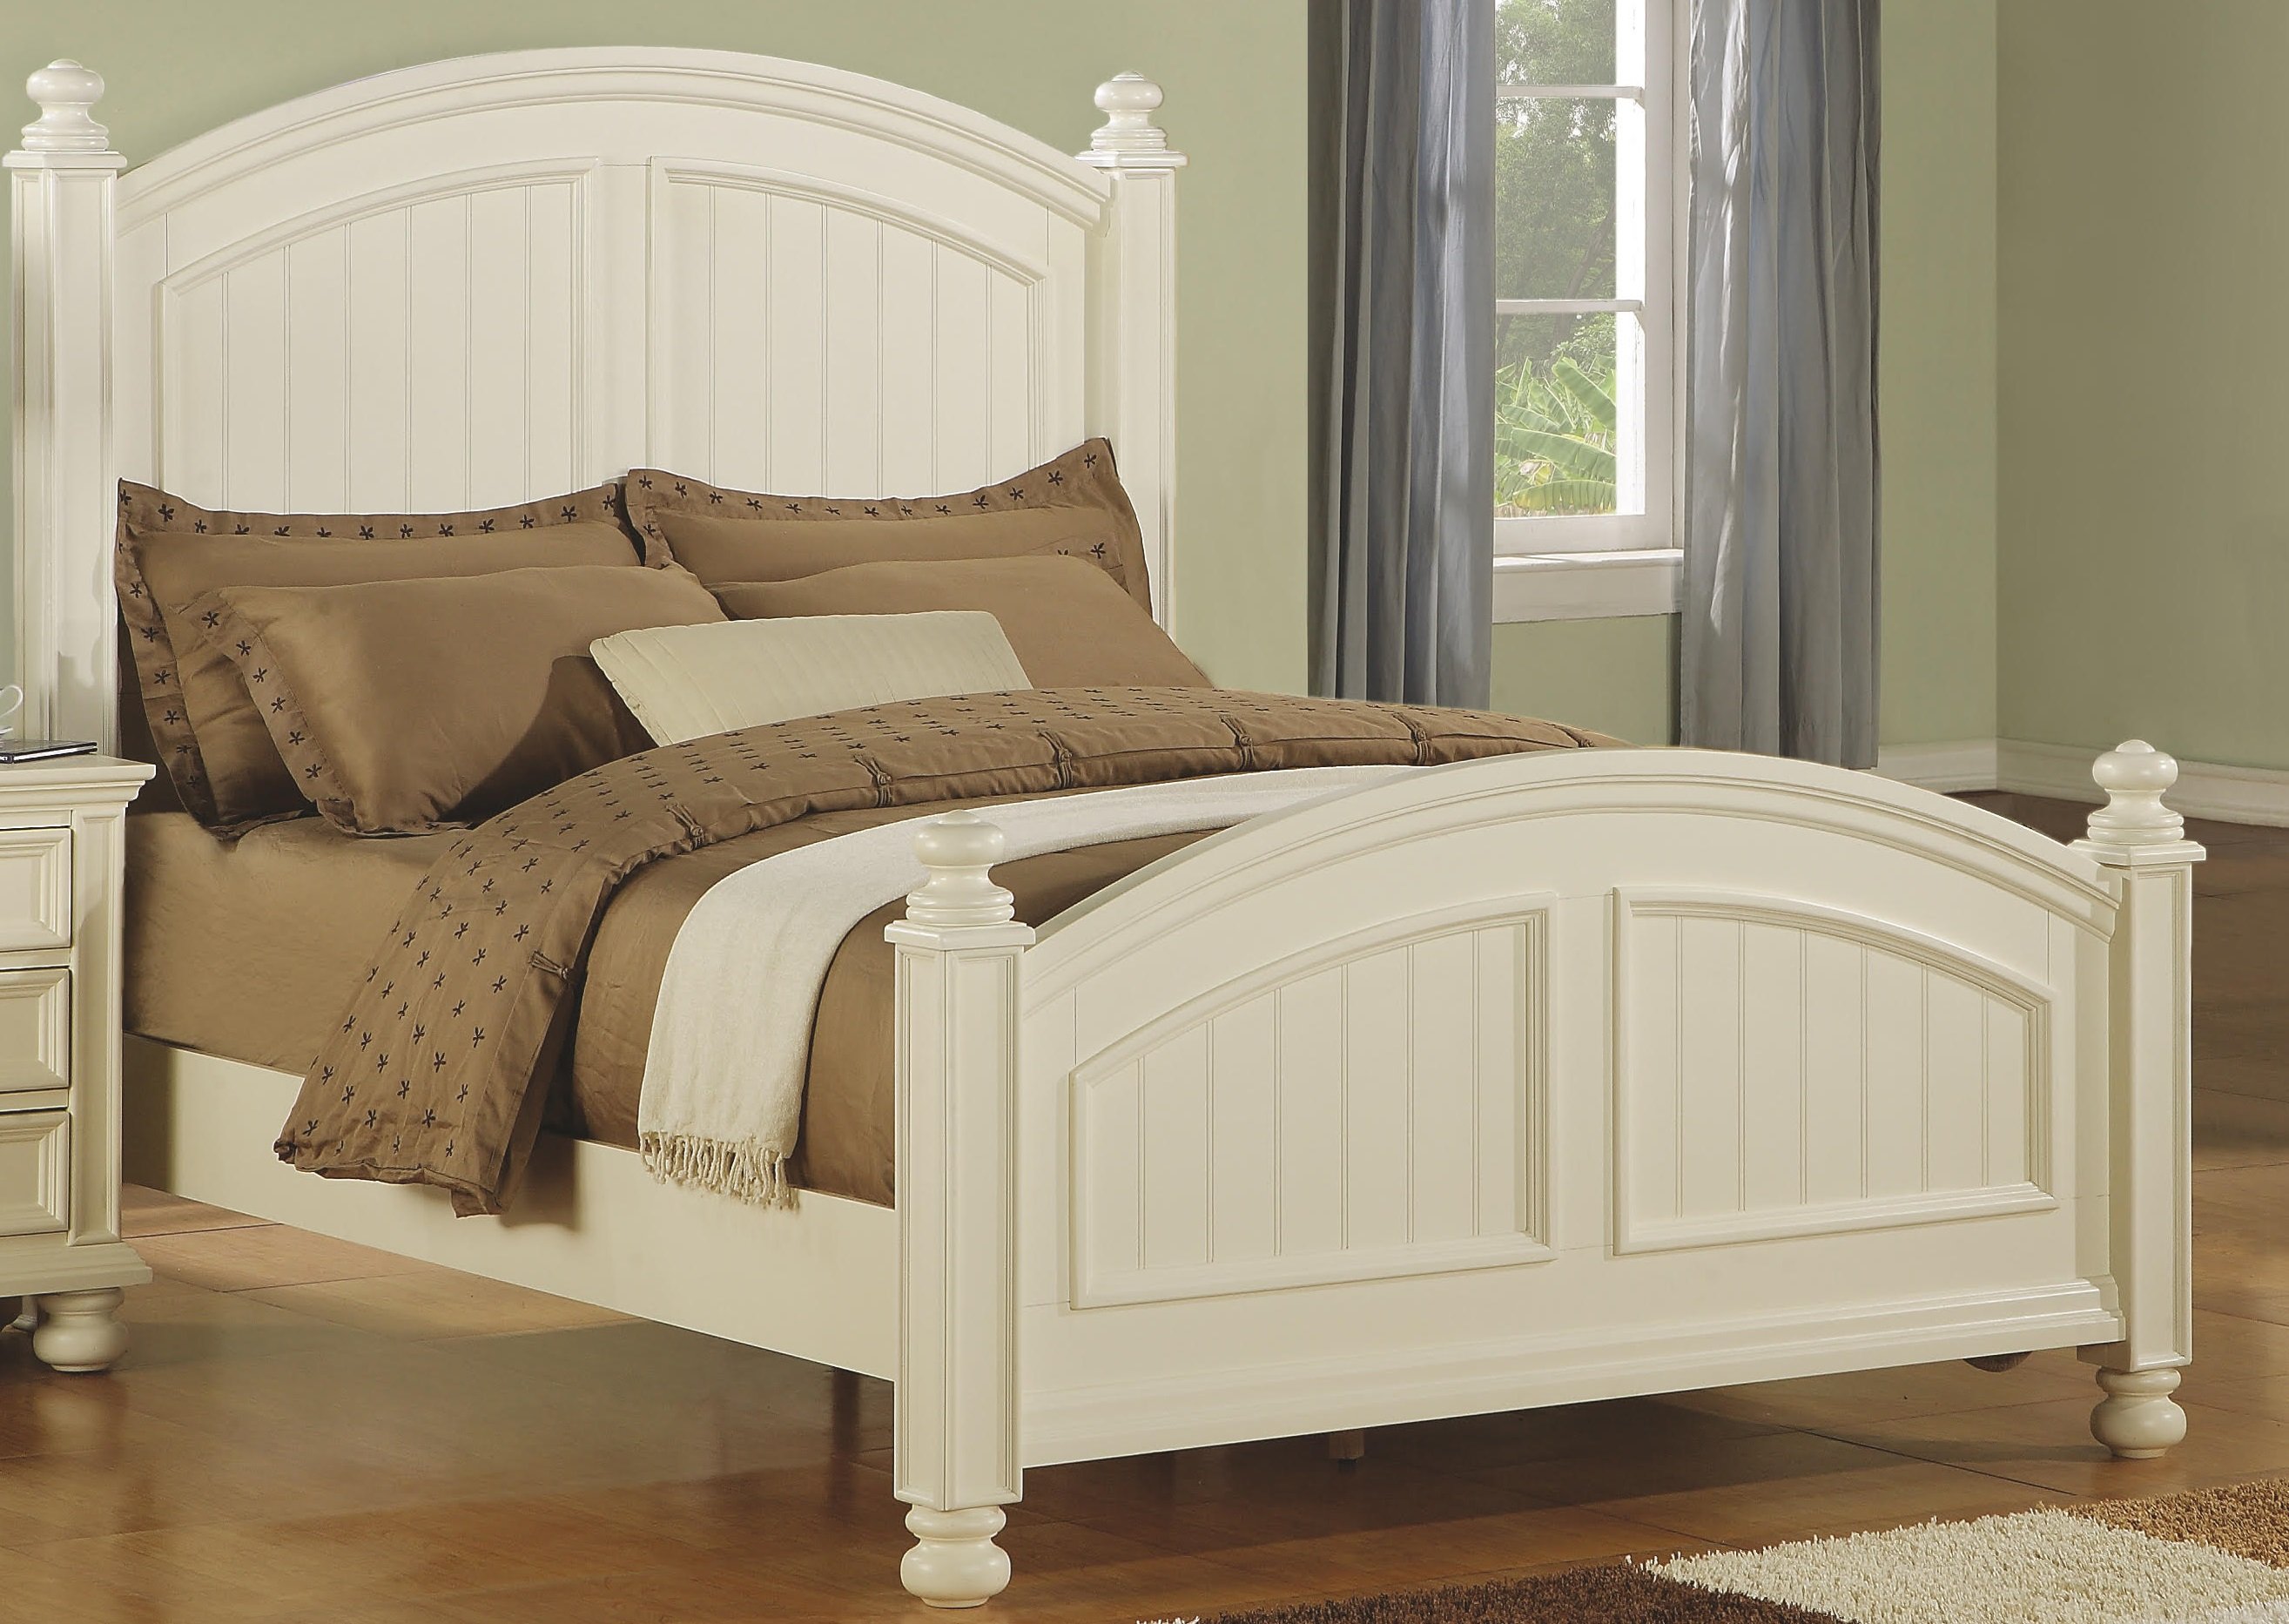 Classic Eggshell White 6 Piece Queen Bedroom Set - Cape Cod | RC Willey ...